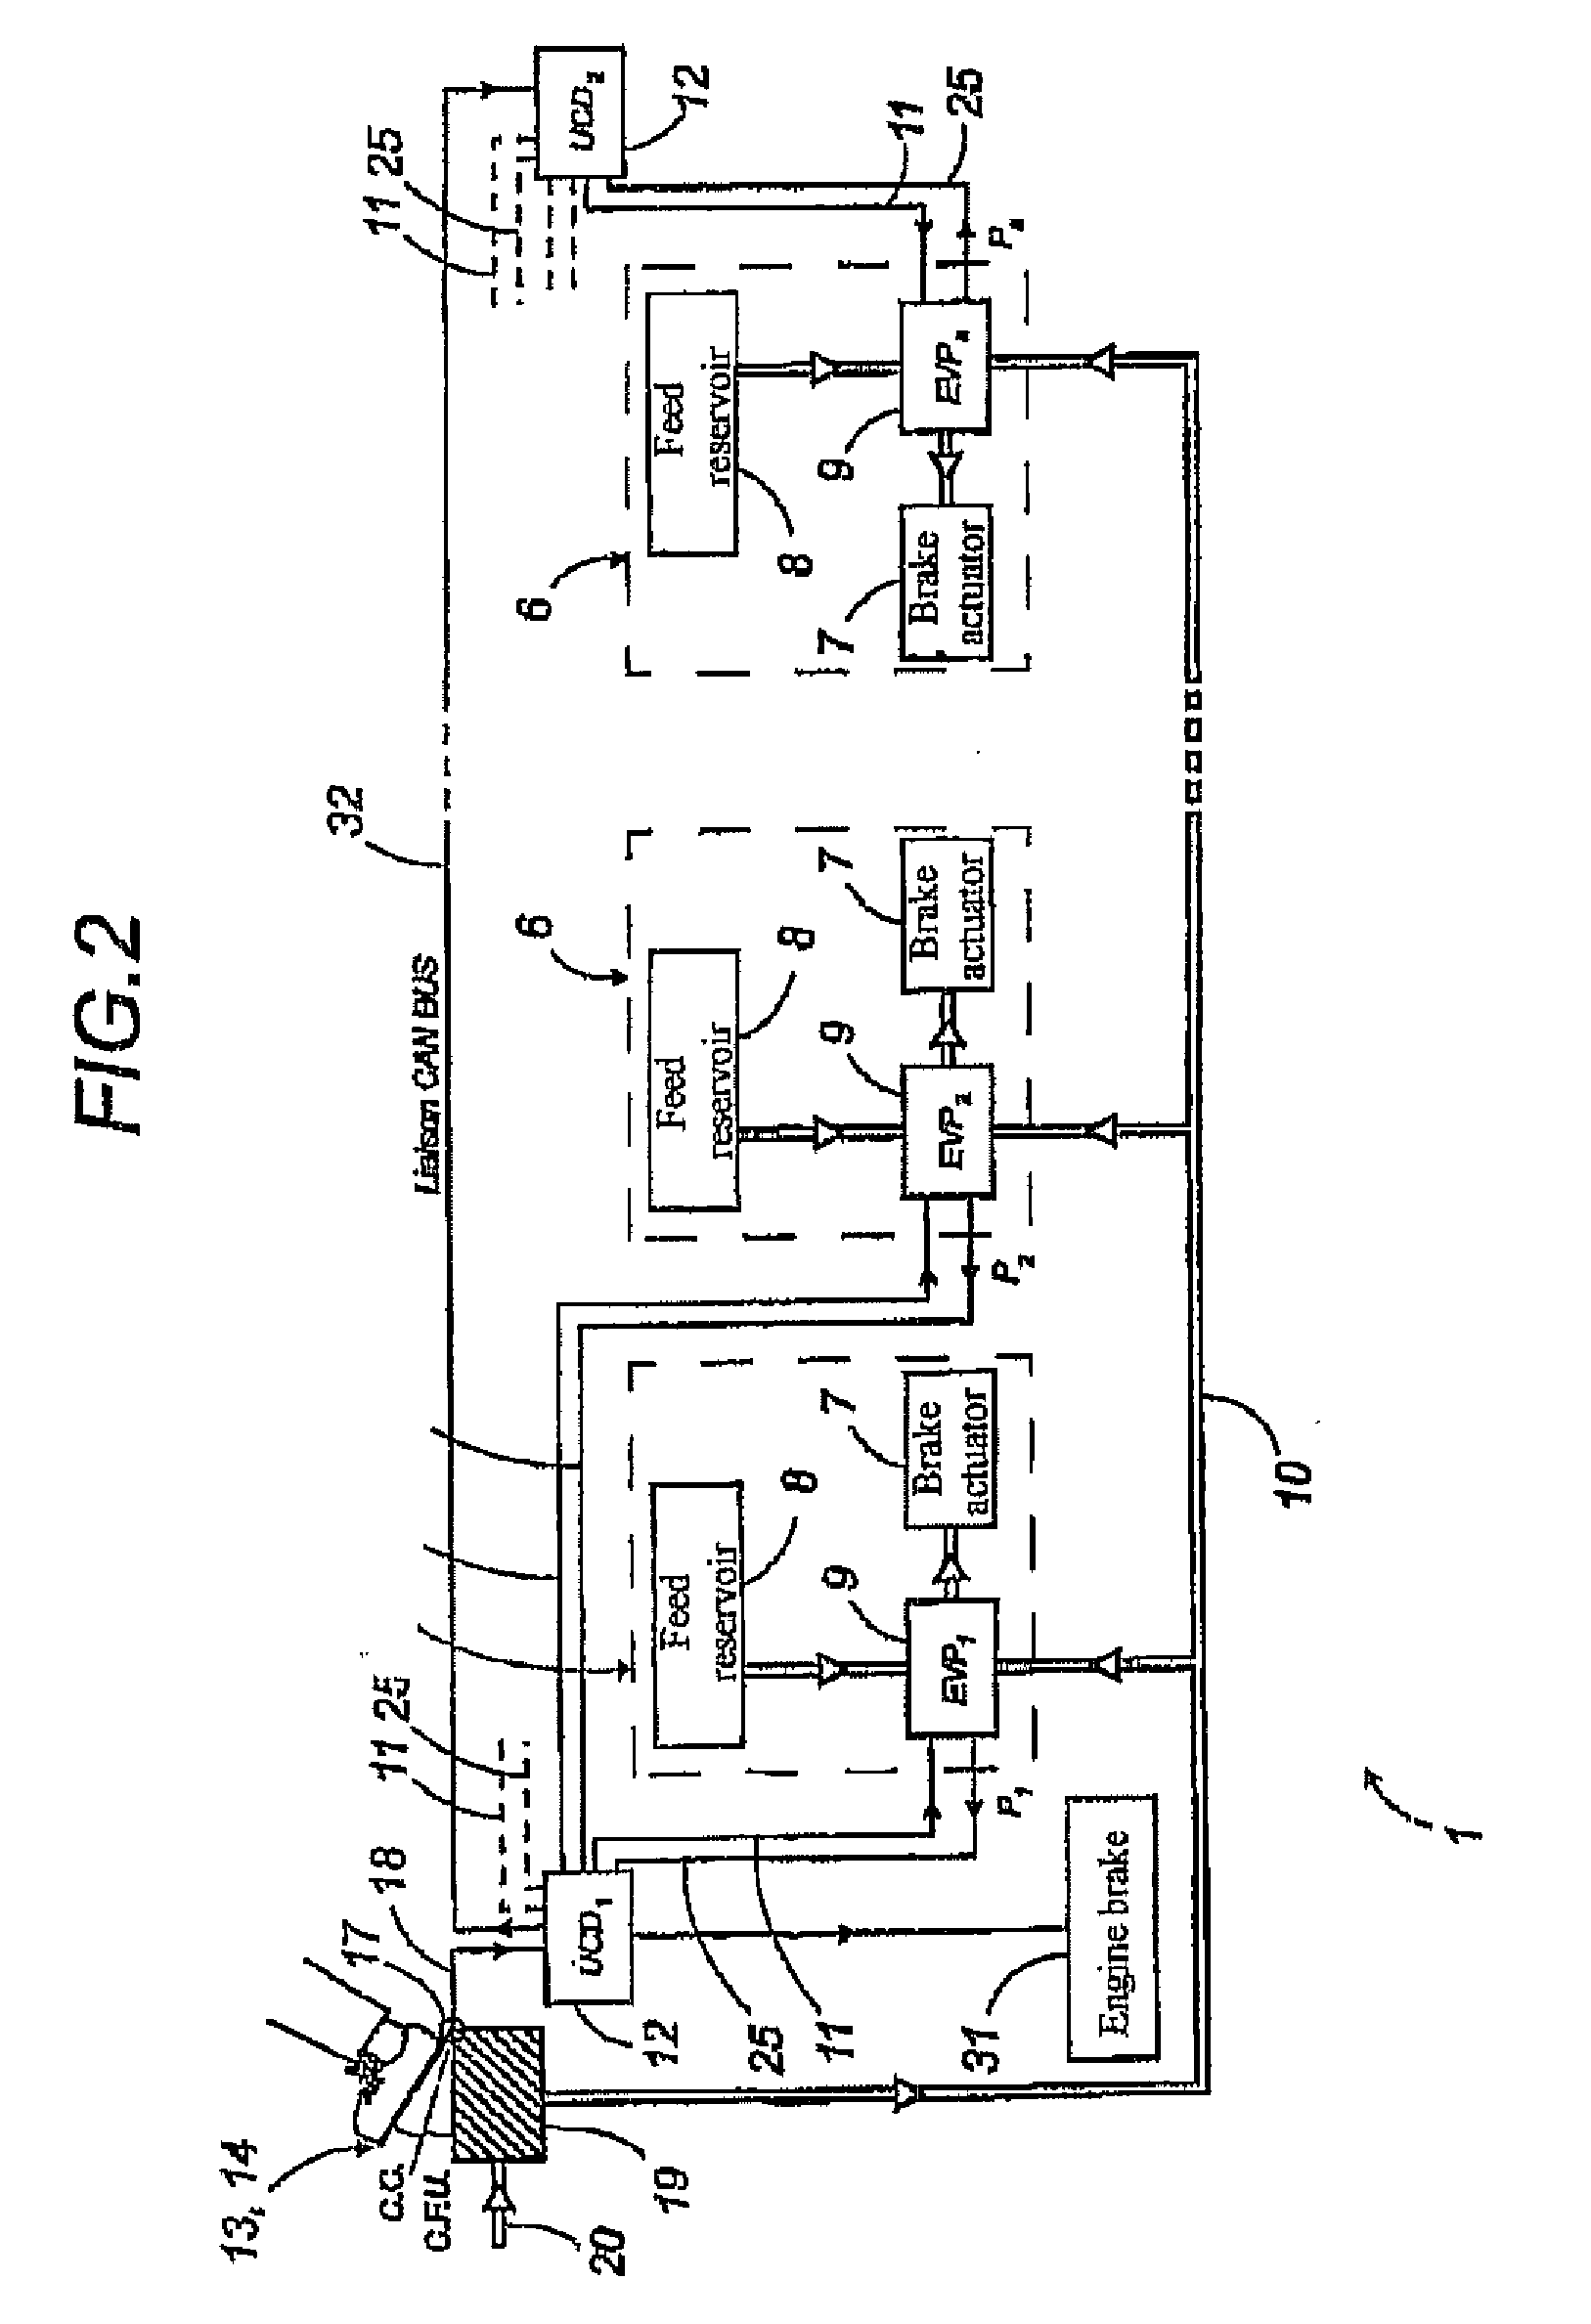 Two-Stage Electromechanically Controlled Braking System for a Multiaxle Road Vehicles